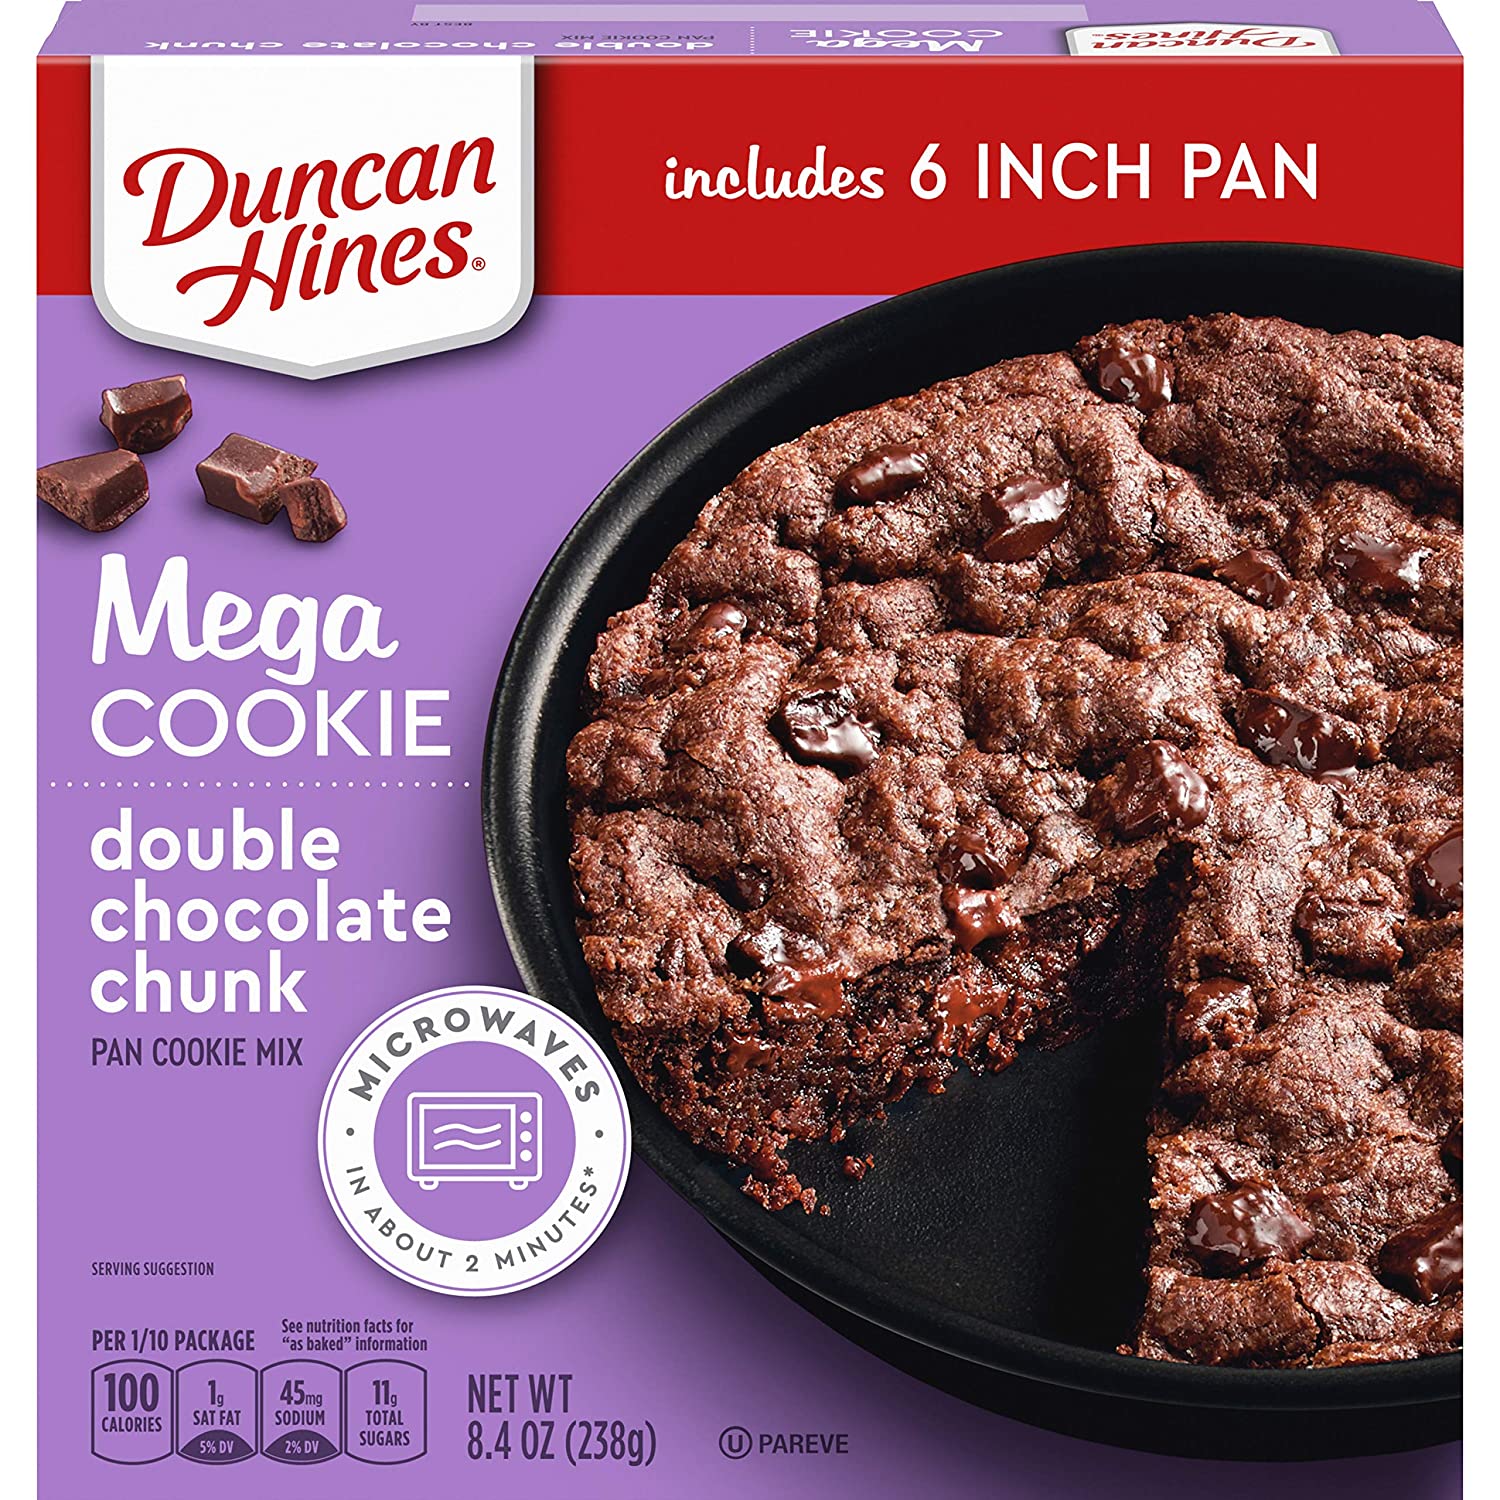 Make A Giant Holiday Cookie With Duncan Hines Mix - Simplemost